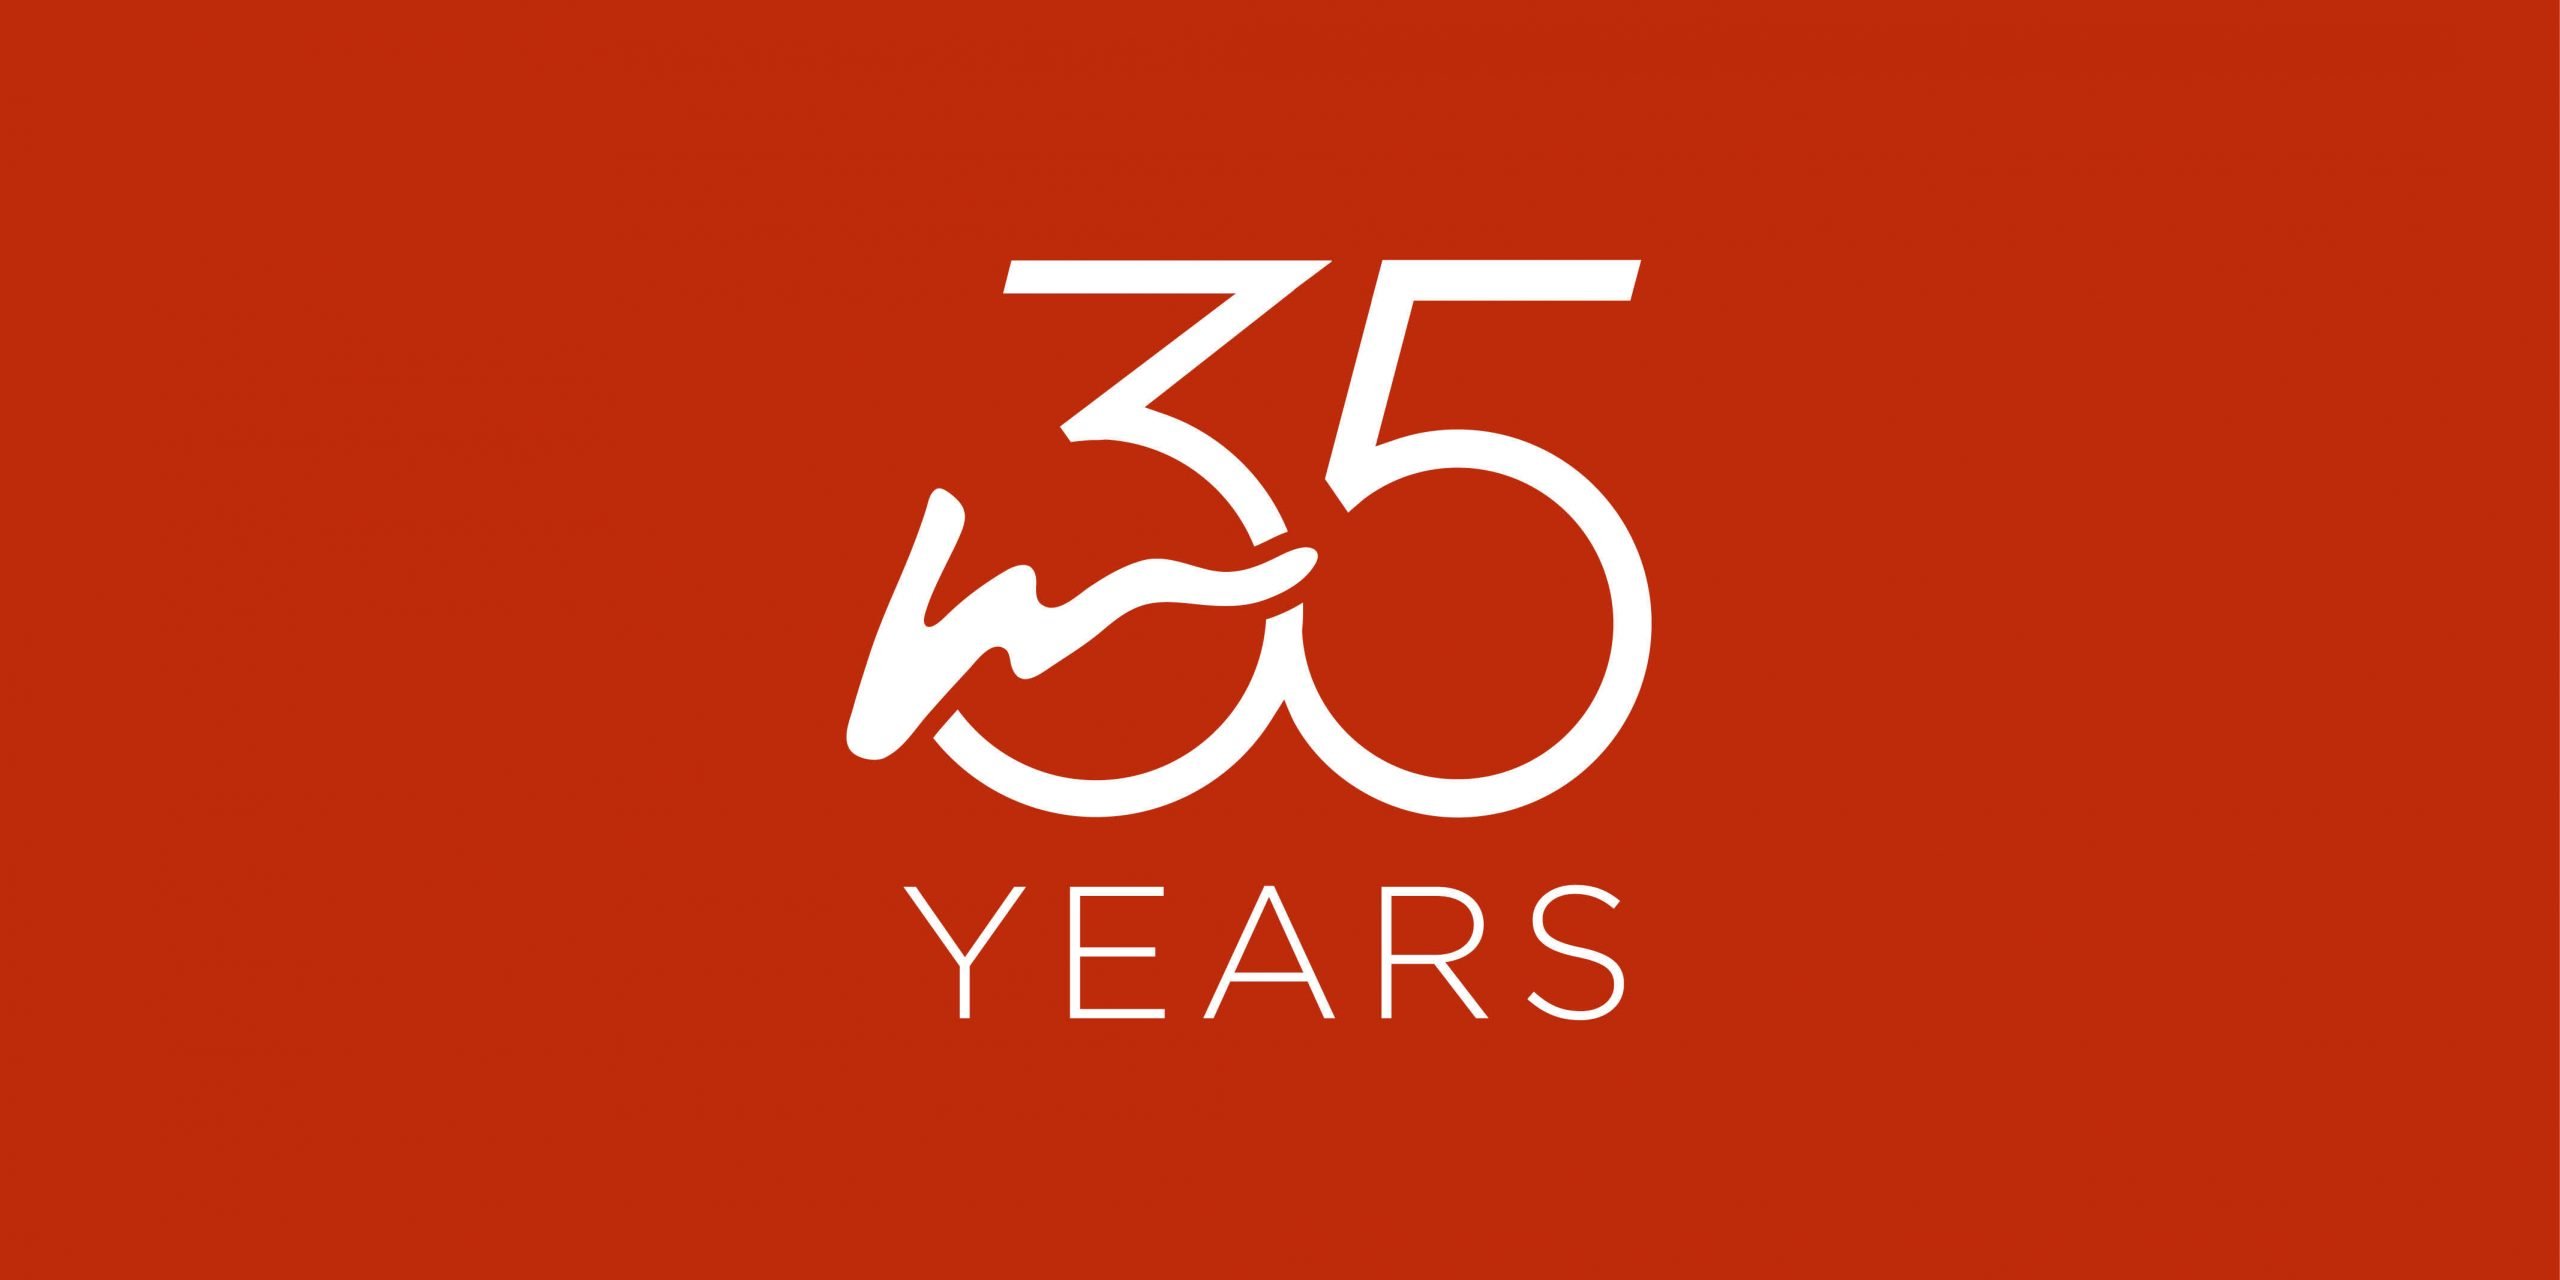 Harris is celebrating 35 years of business in 2021